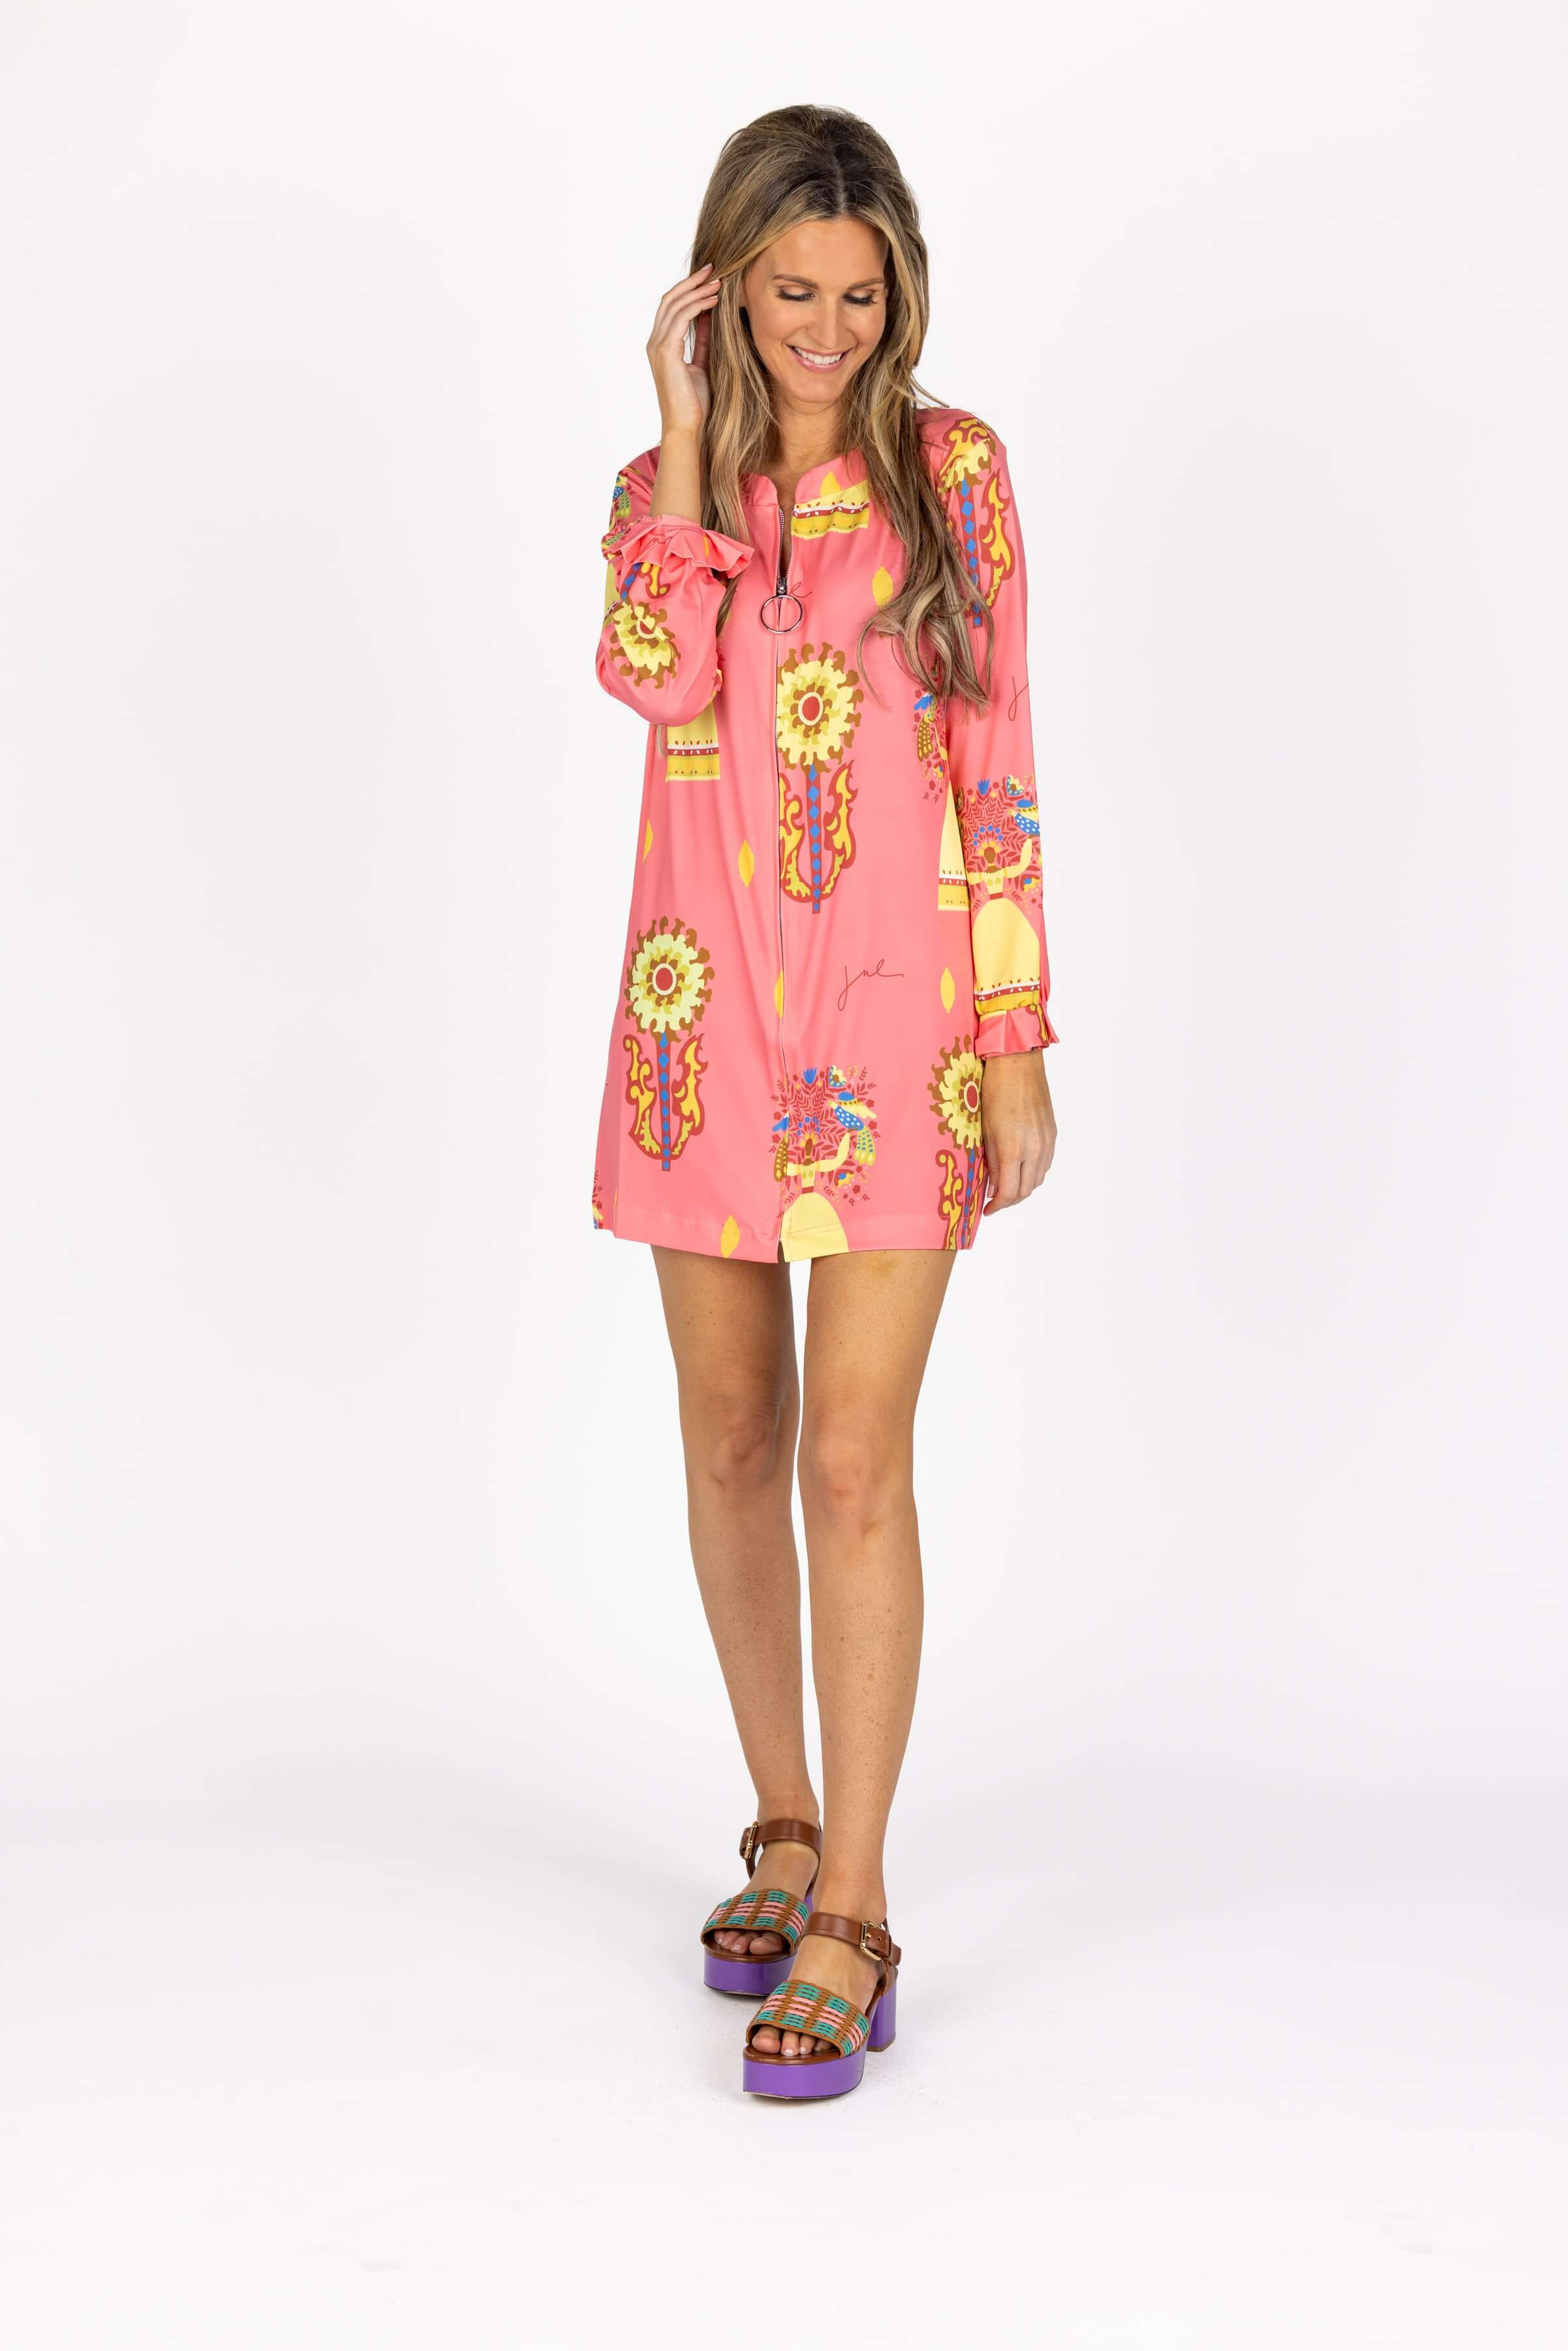 The Twiggy Coverup in Spanish Lovers Pink